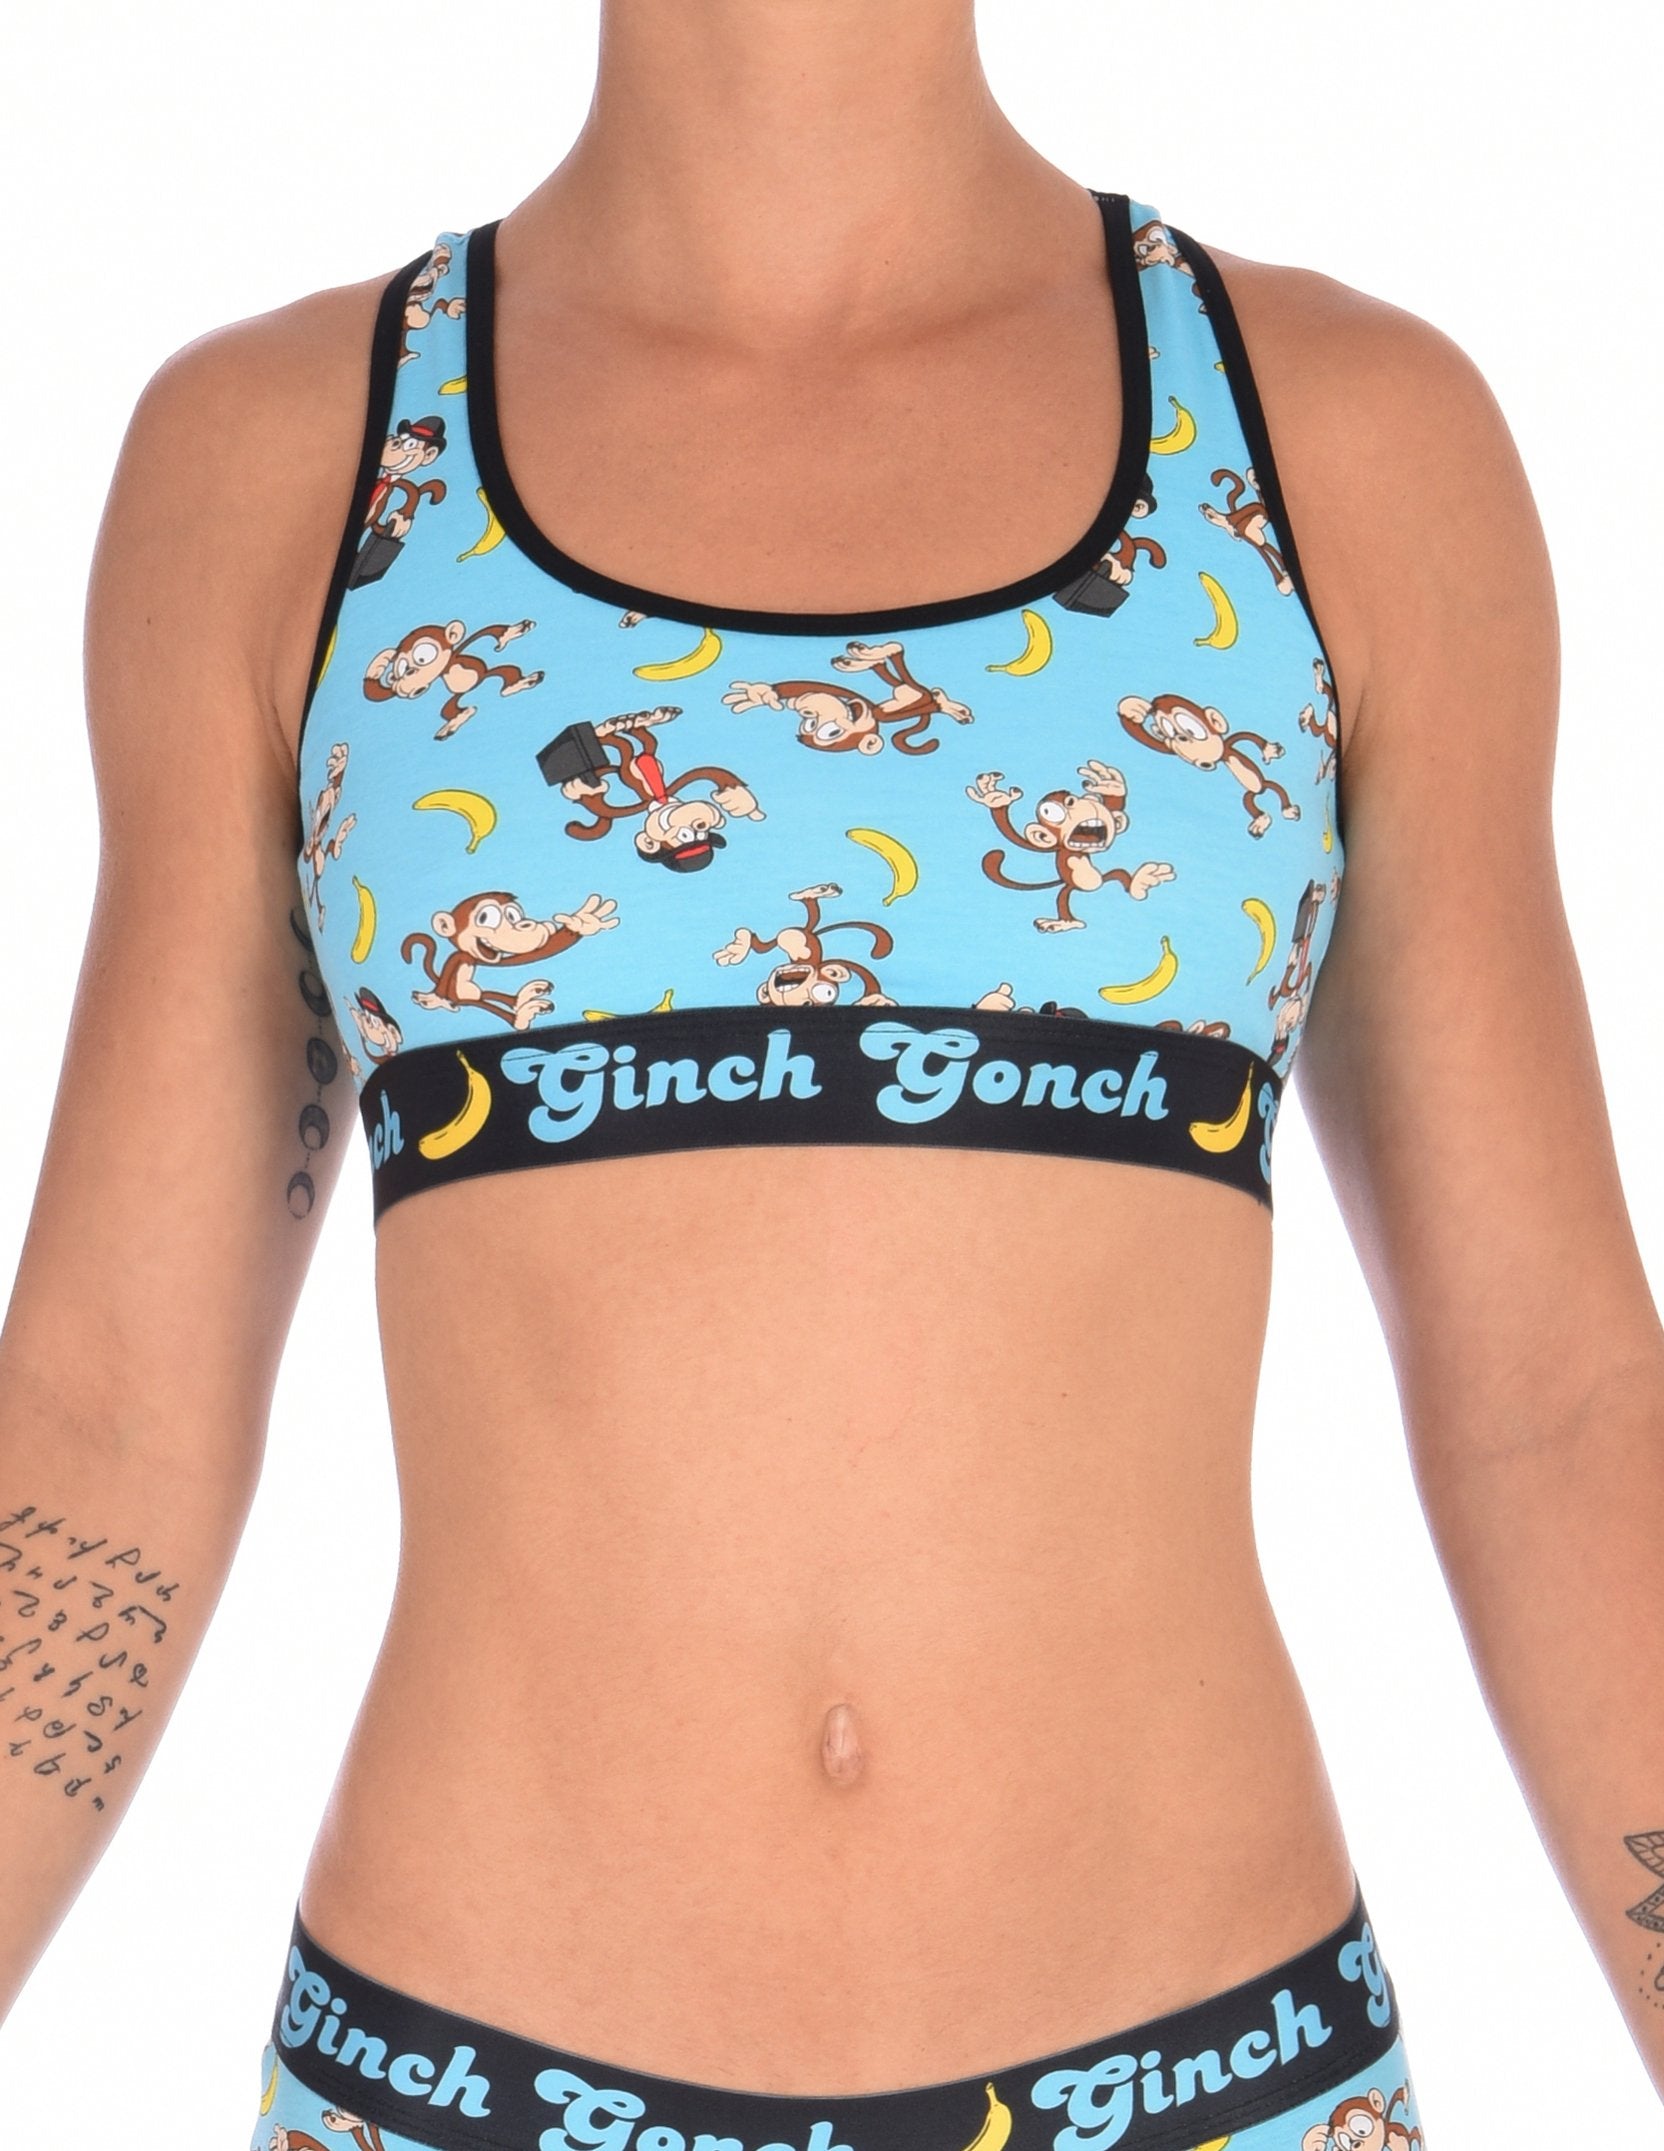 Ginch Gonch Monkey Business Women's Sports Bra Underwear with blue background, monkeys, and bananas. Black trim and printed waistband with Ginch Gonch and bananas. Front.